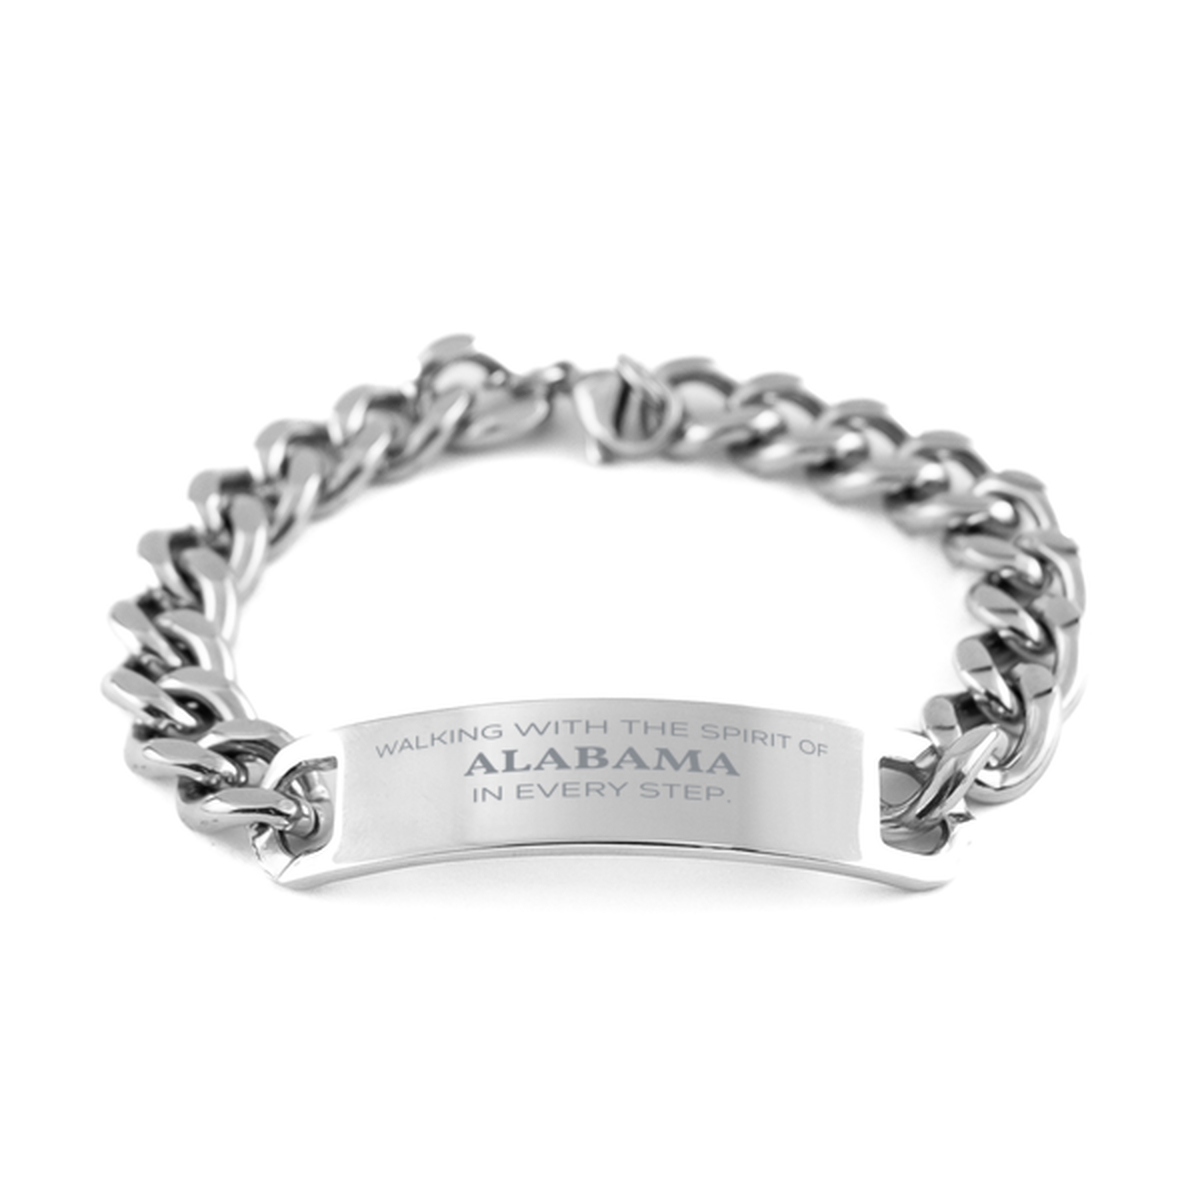 Alabama Gifts, Walking with the spirit, Love Alabama Birthday Christmas Cuban Chain Stainless Steel Bracelet For Alabama People, Men, Women, Friends